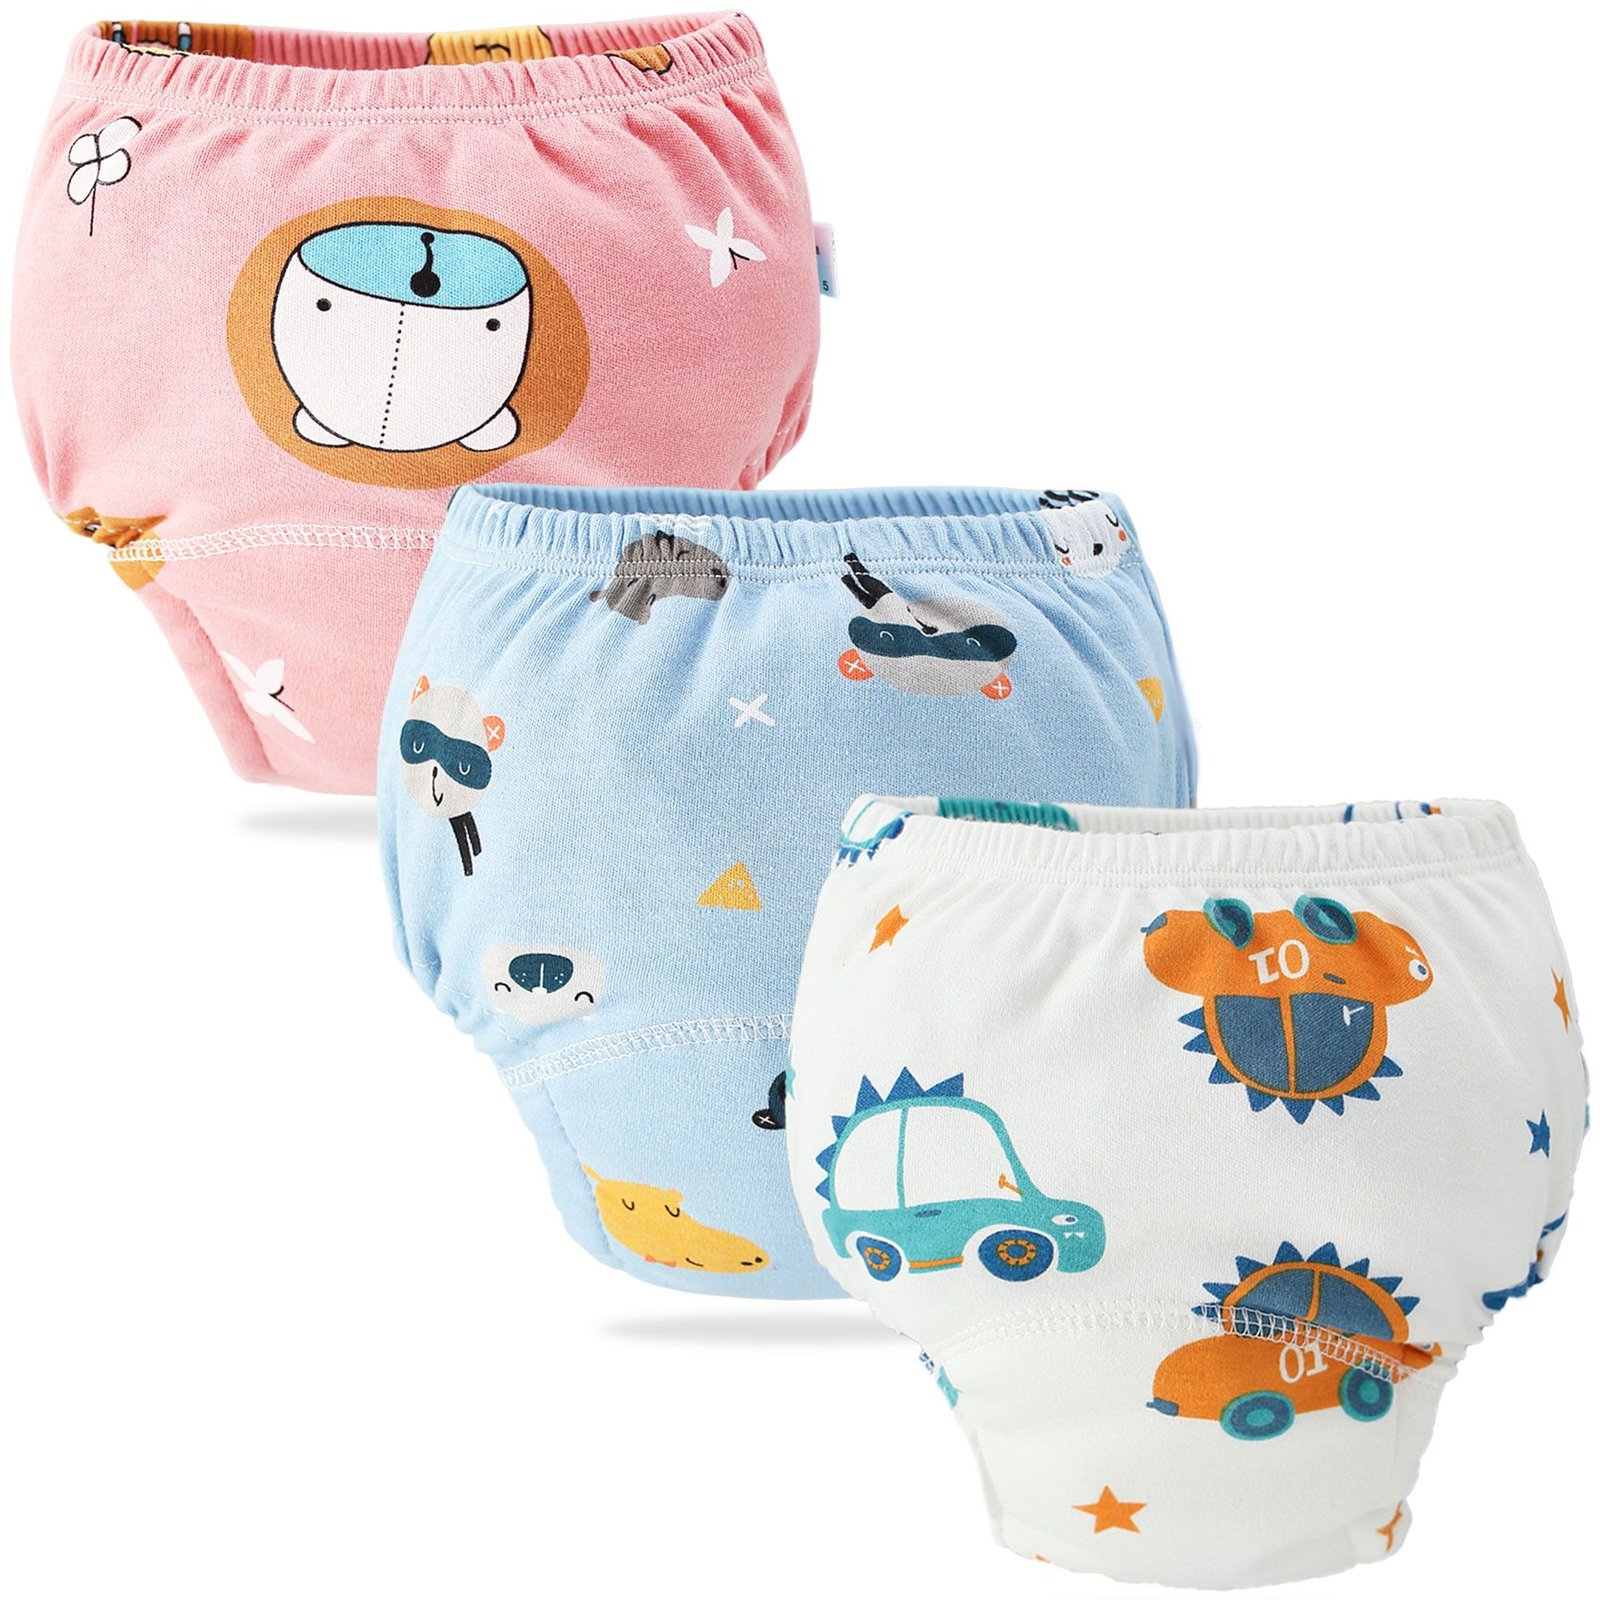 Toddler 3 Pack Potty Training Pants Underwear, 12-24 Months